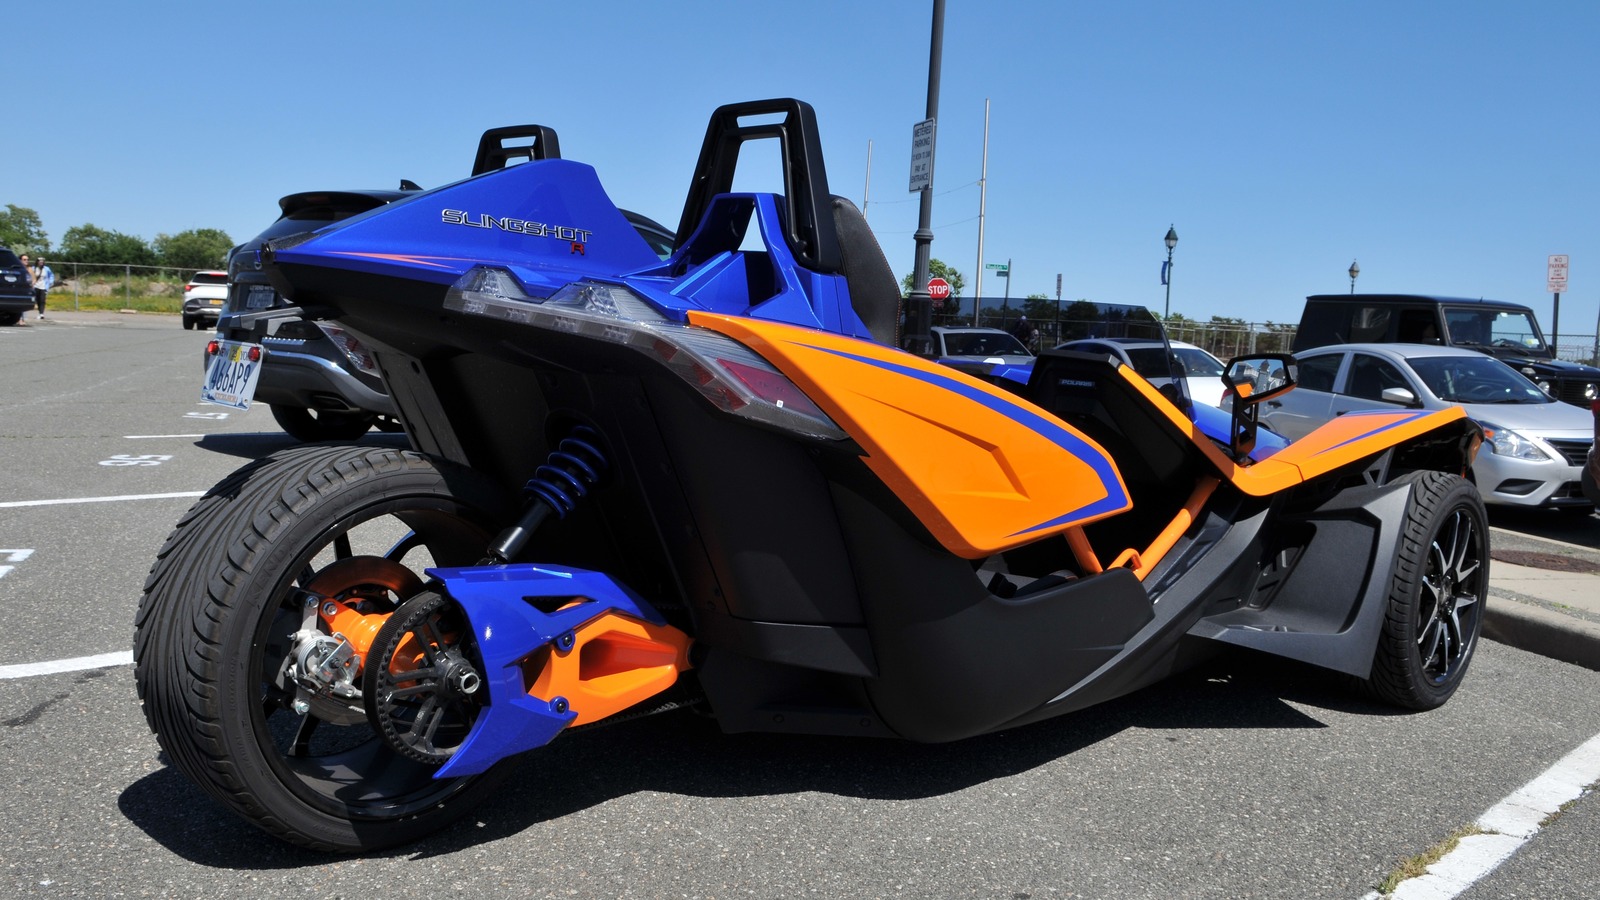 Is The Polaris Slingshot A Motorcycle? Here's Everything You Need To Know